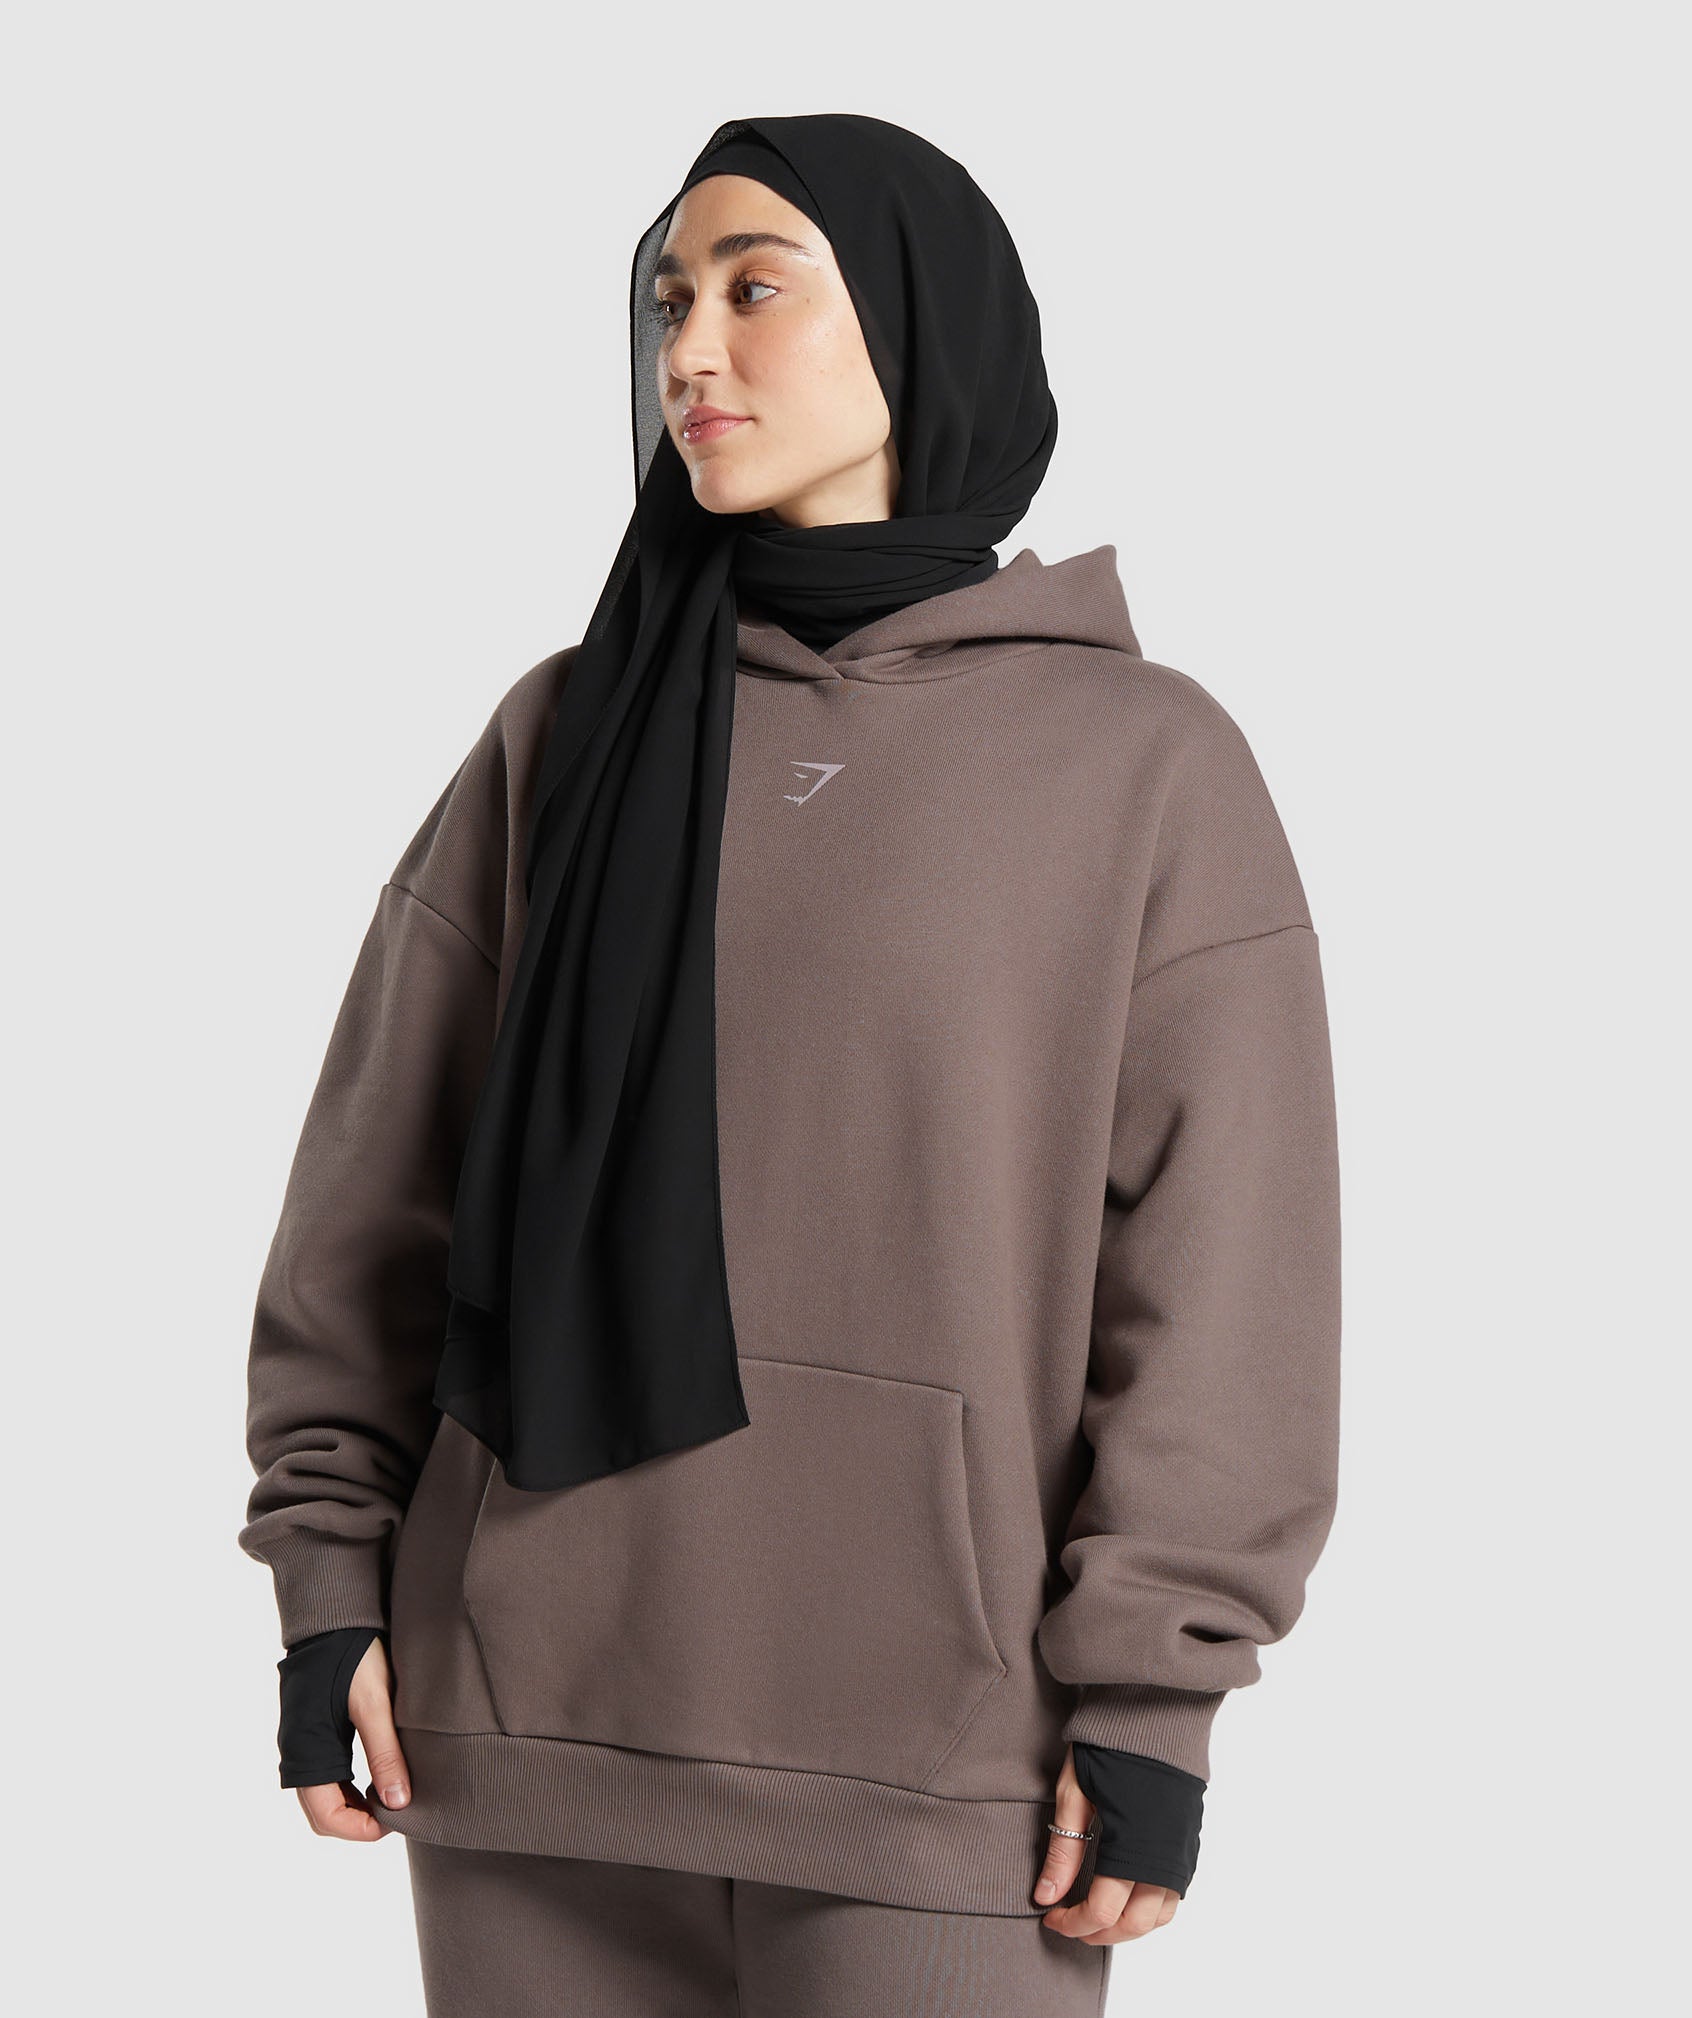 GS X Leana Deeb Oversized Graphic Hoodie in Dusty Brown - view 2